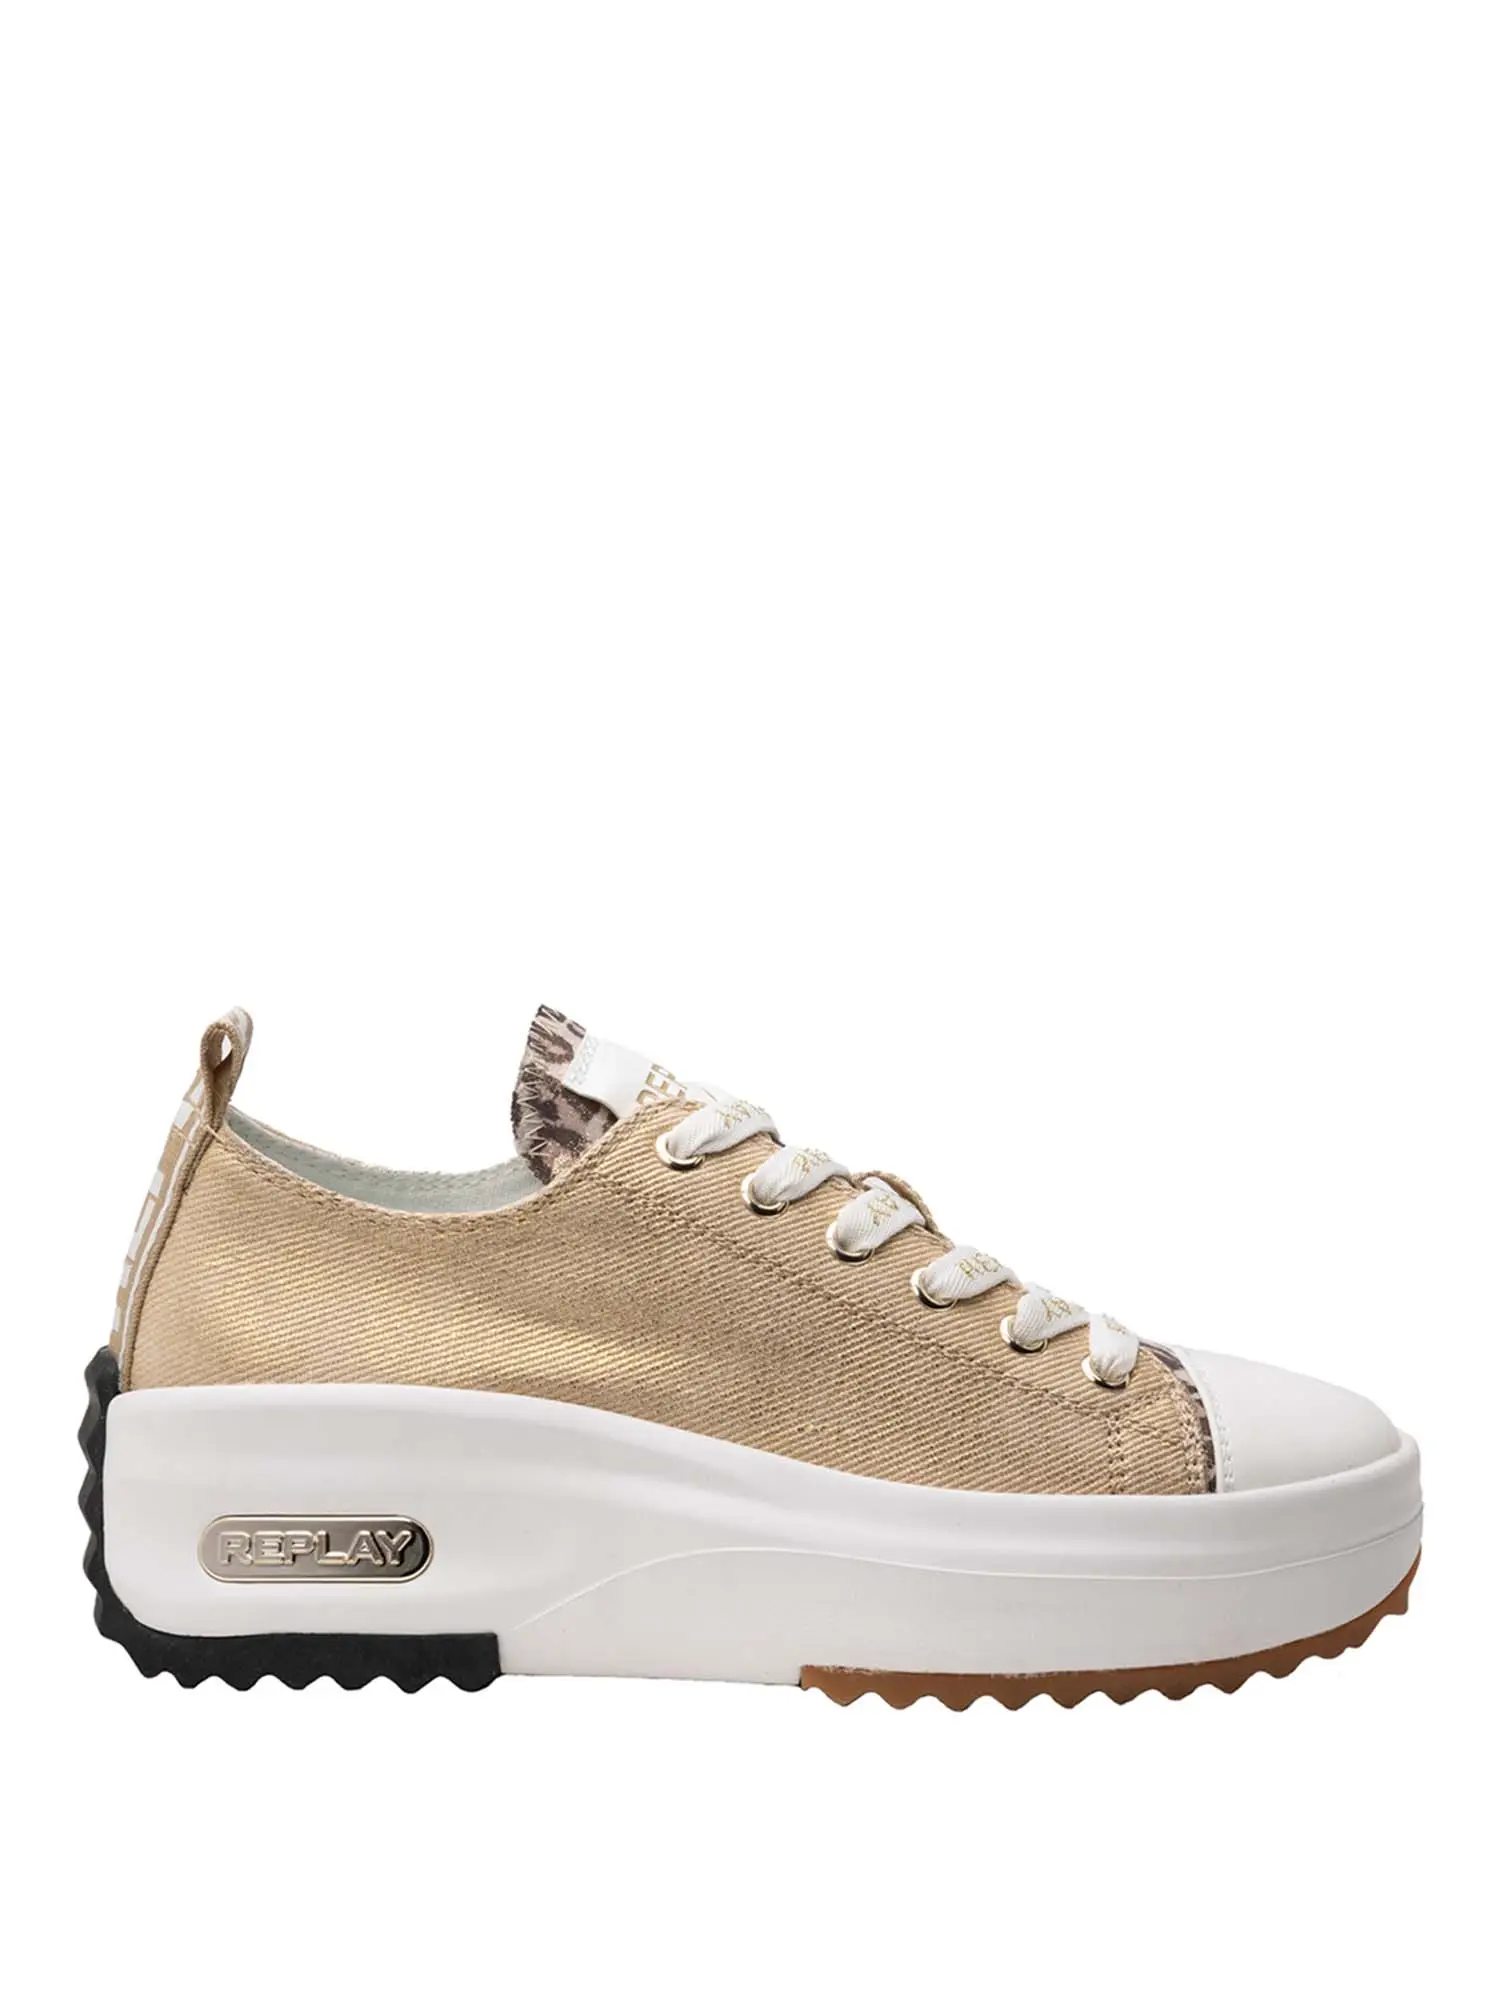 SNEAKERS DONNA - REPLAY - RZ5M0002T - BEIGE, 37